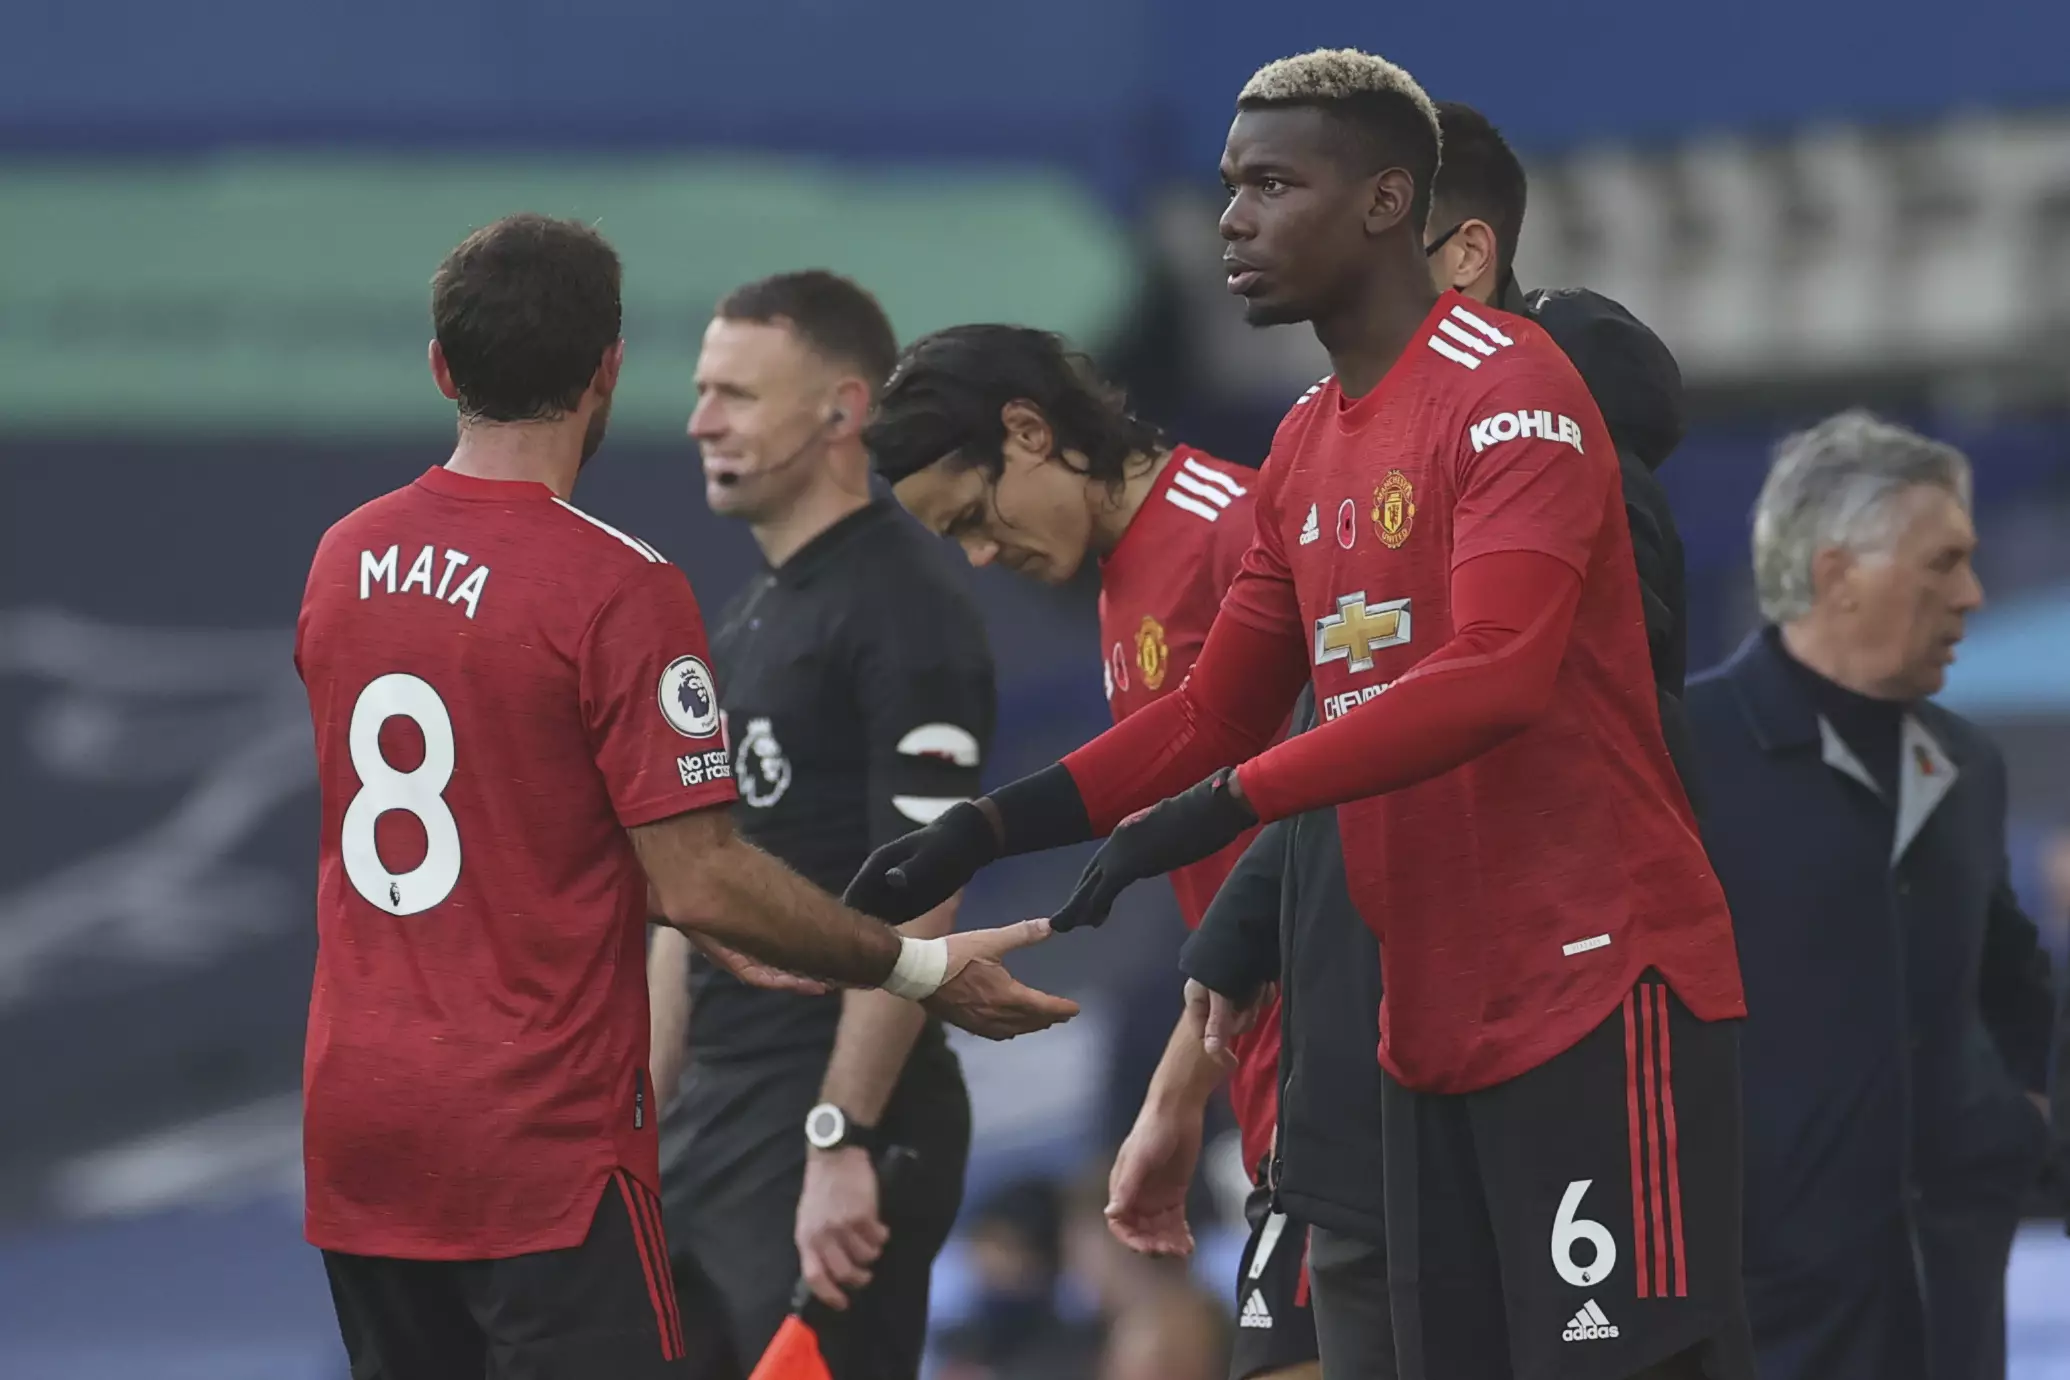 Pogba came on as a substitute against Everton. Image: PA Images